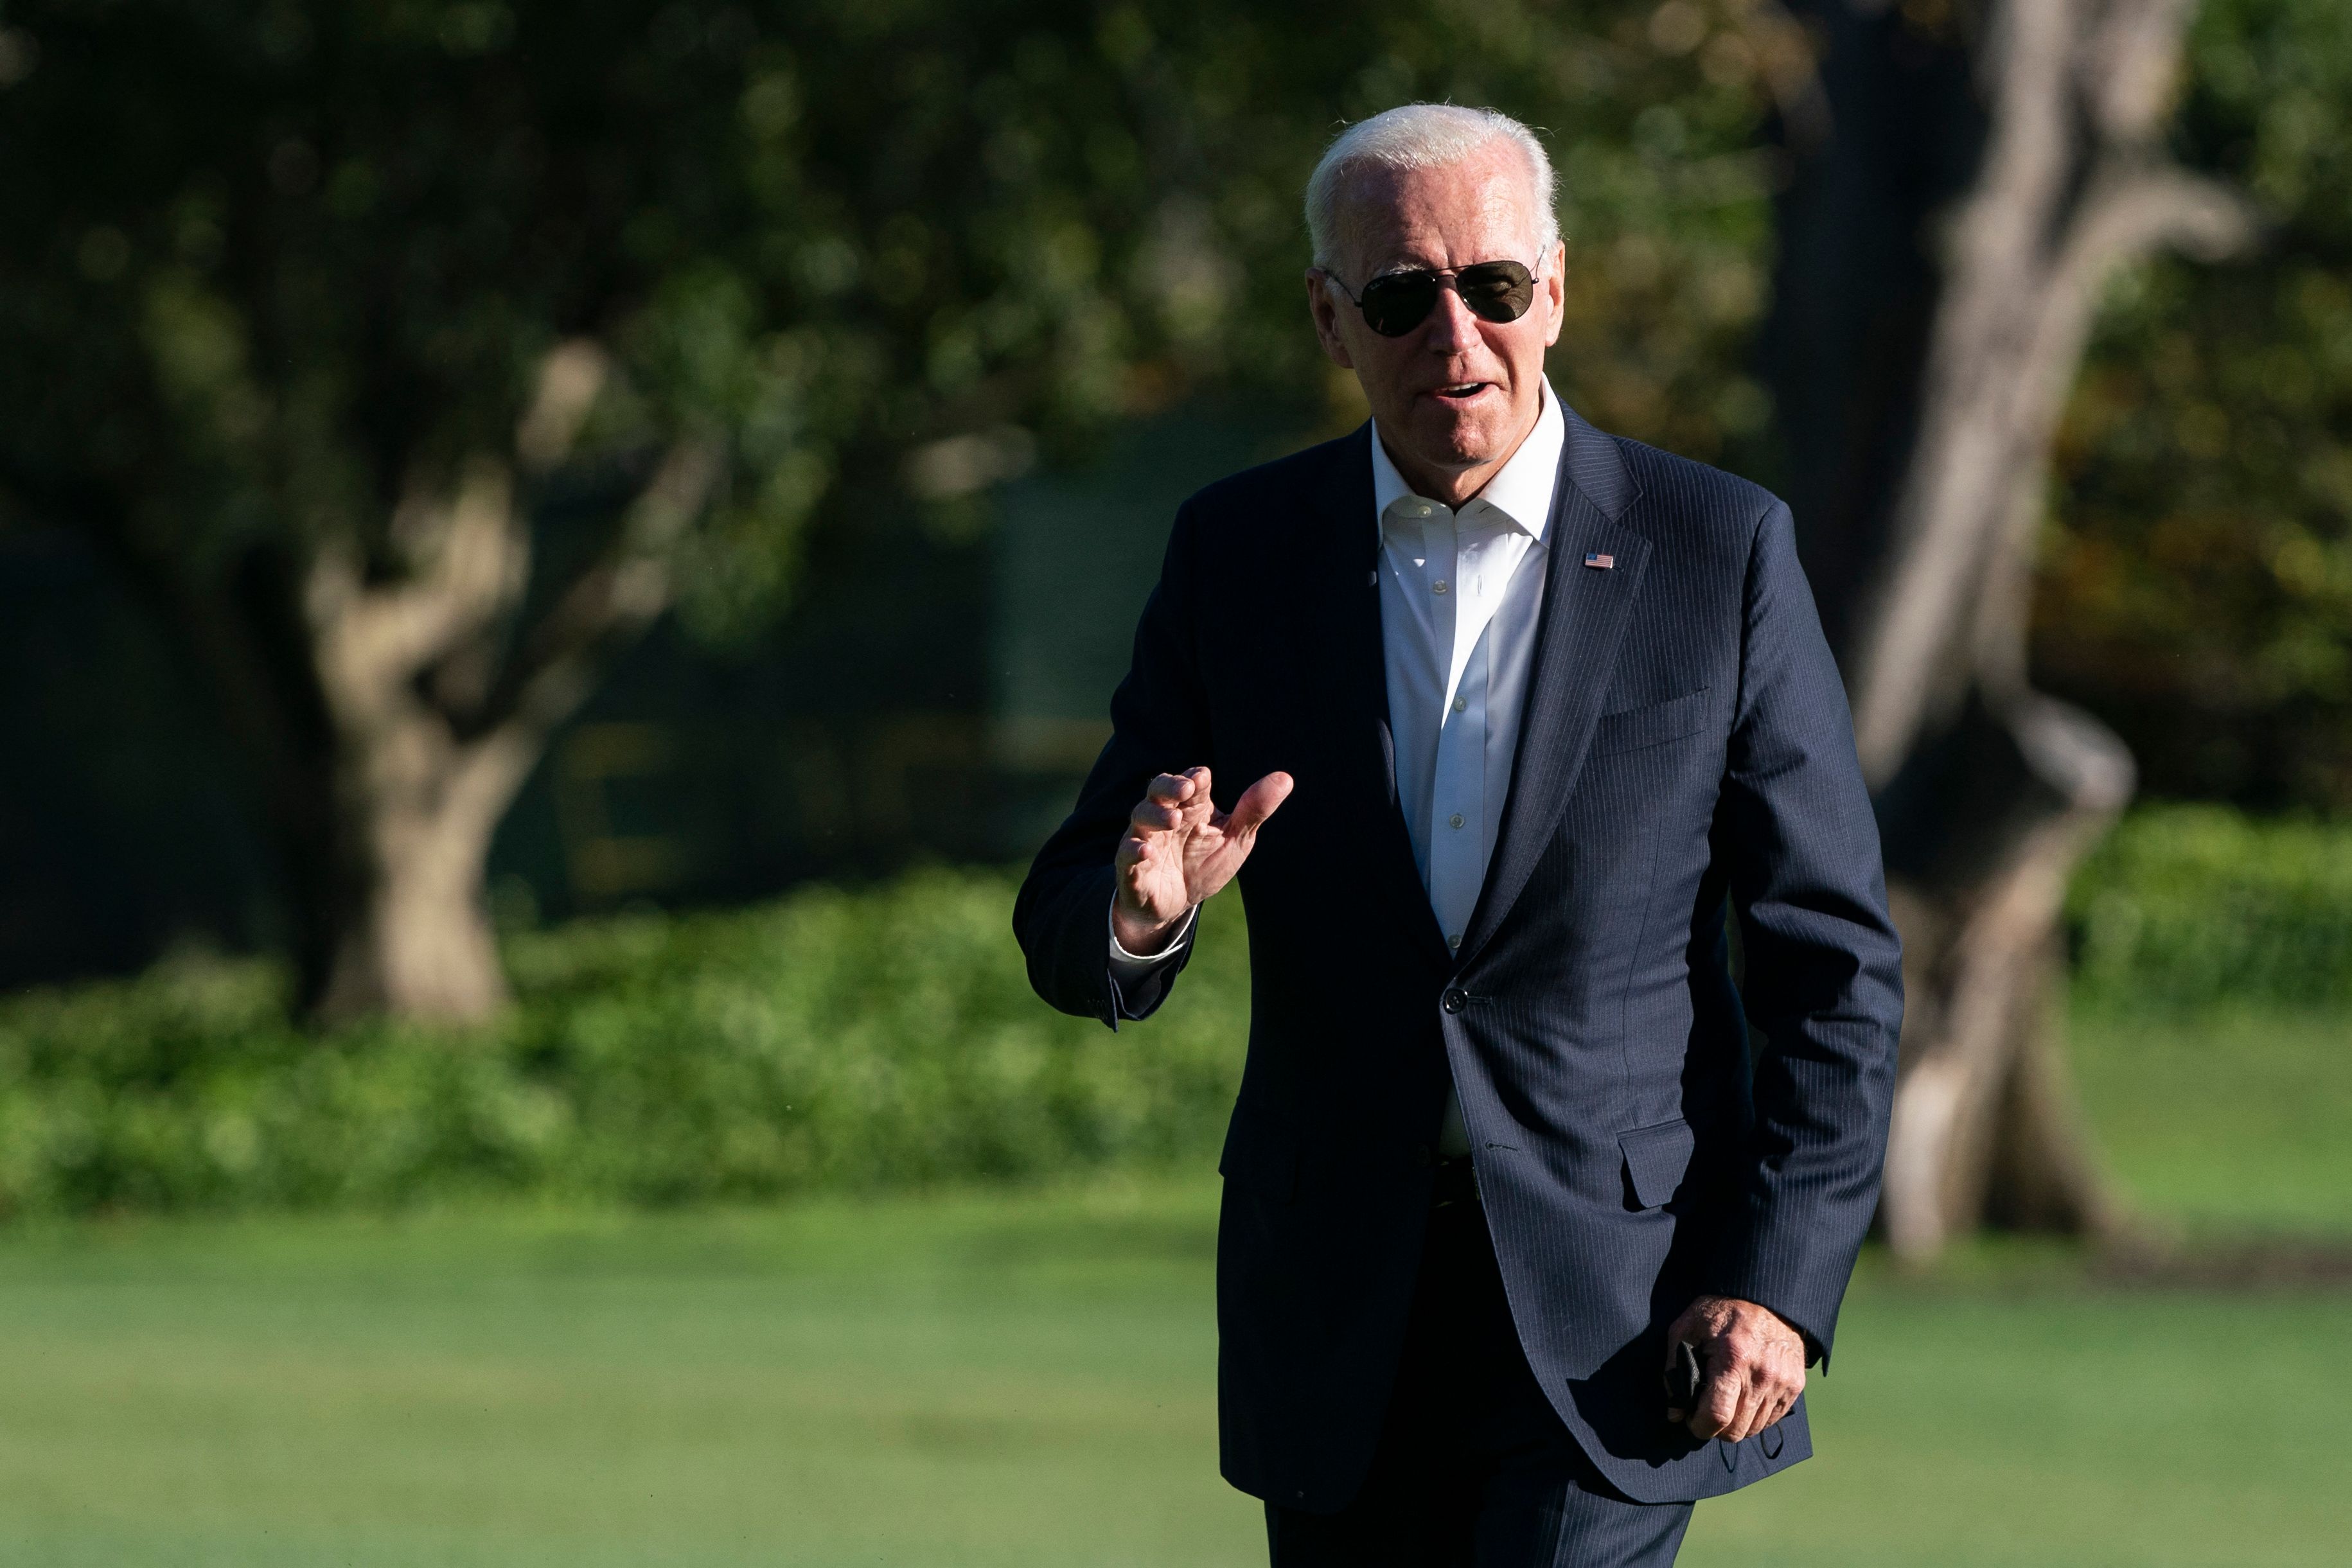 COVID Booster Live Updates: Joe Biden to Receive His Third Shot at White House thumbnail